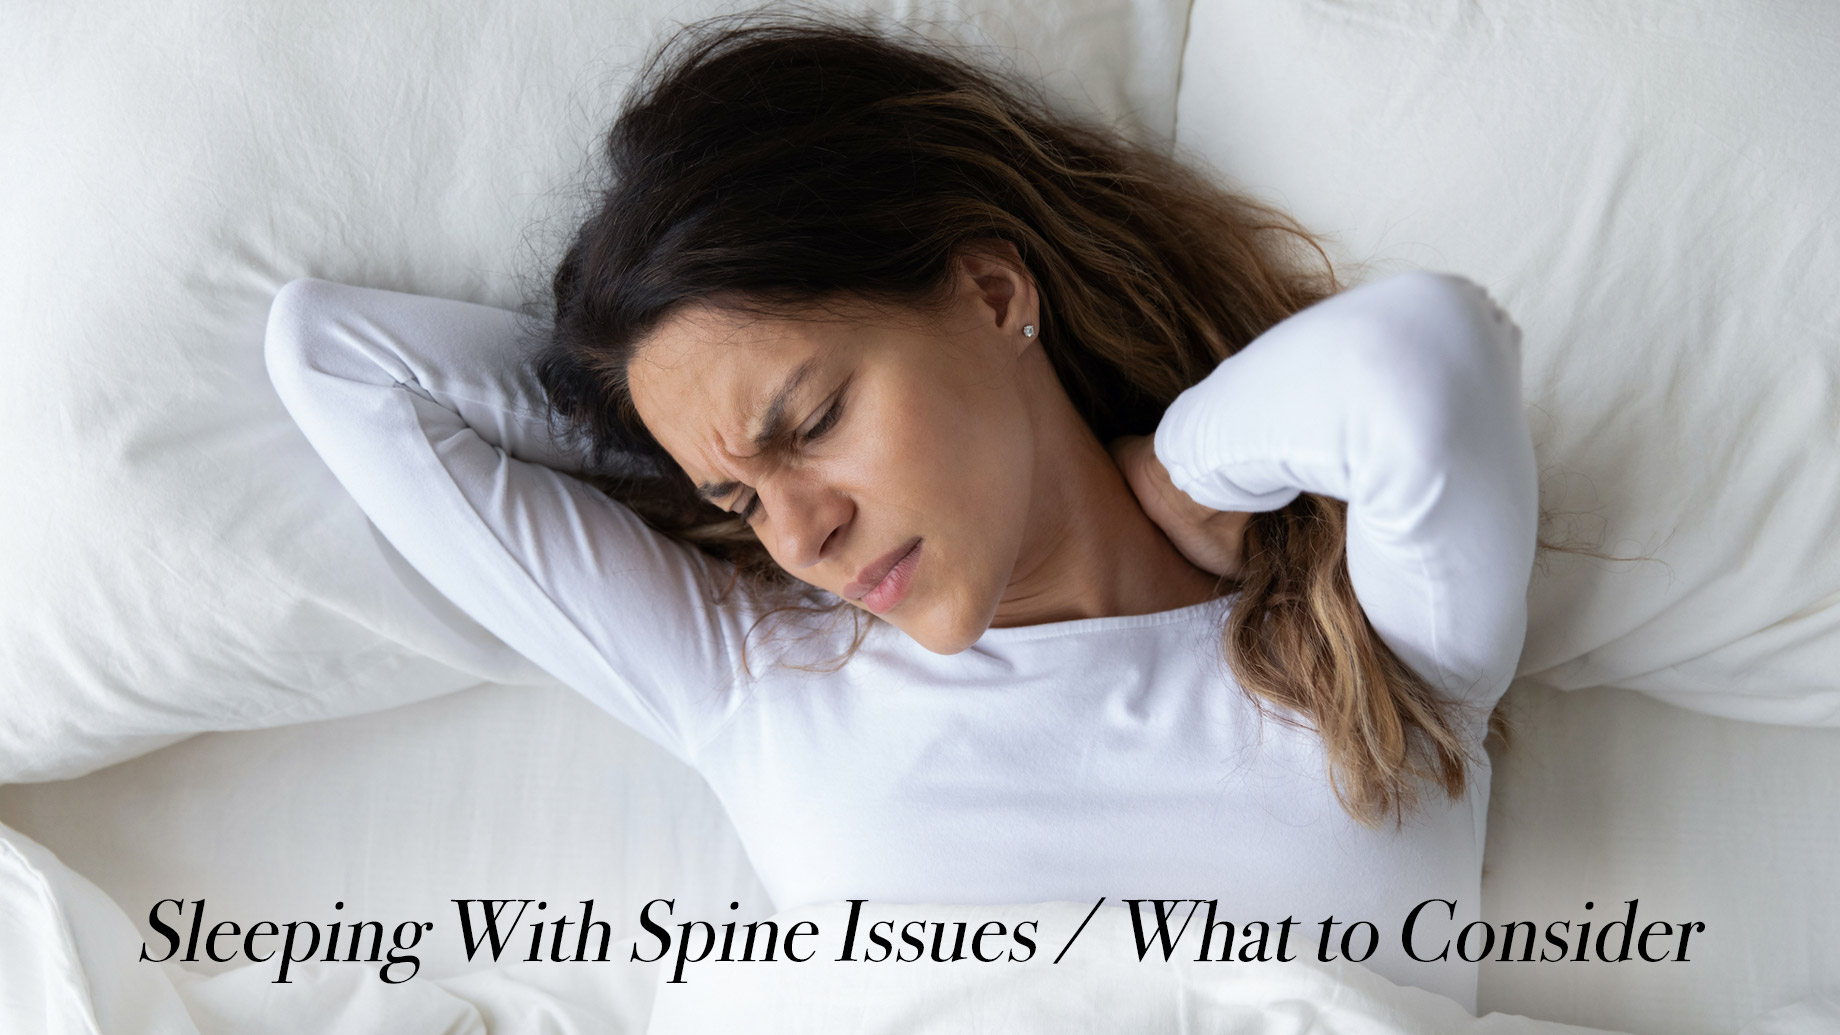 Sleeping With Spine Issues - What to Consider